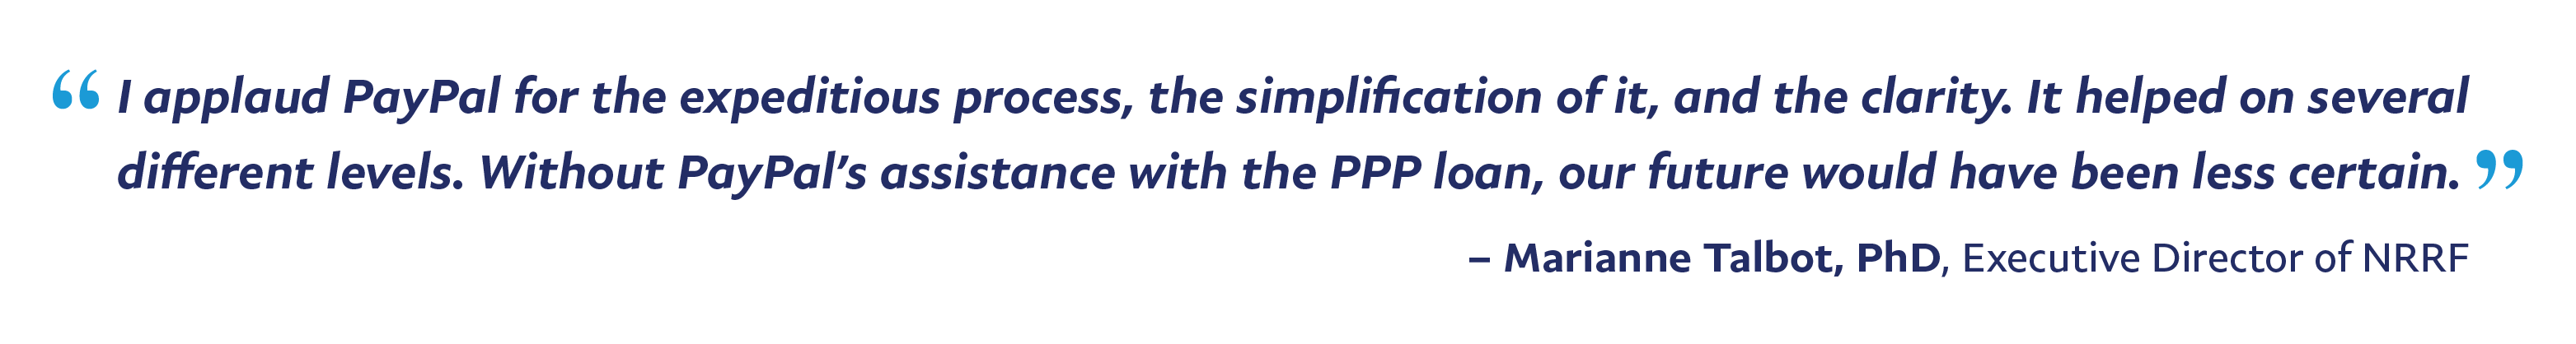 “I applaud PayPal for the expeditious process, the simplification of it, and the clarity. It helped on several different levels. Without PayPal’s assistance with the PPP loan, our future would have been less certain.” – Marianne Talbot, PhD, Executive Director, 